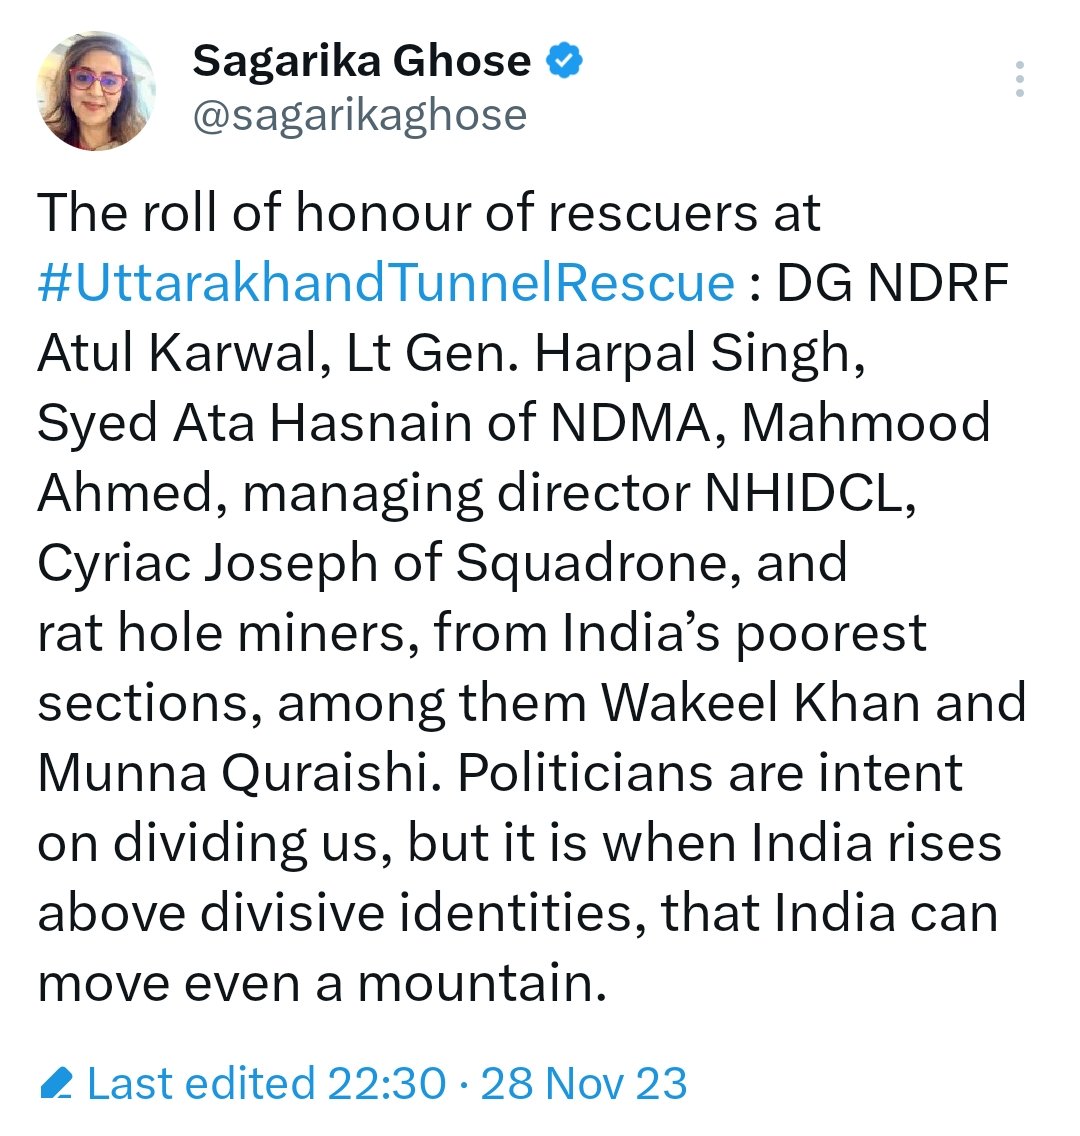 This shameless Italian bootlicker found 5-6 non Hindu names out of 2000+ & trying to show that it's non Hindus who should be credited for the success of #UttarakhandTunnelRescue.

And then these people have the audacity to say don't make everything religious.

Btw I'm surprised